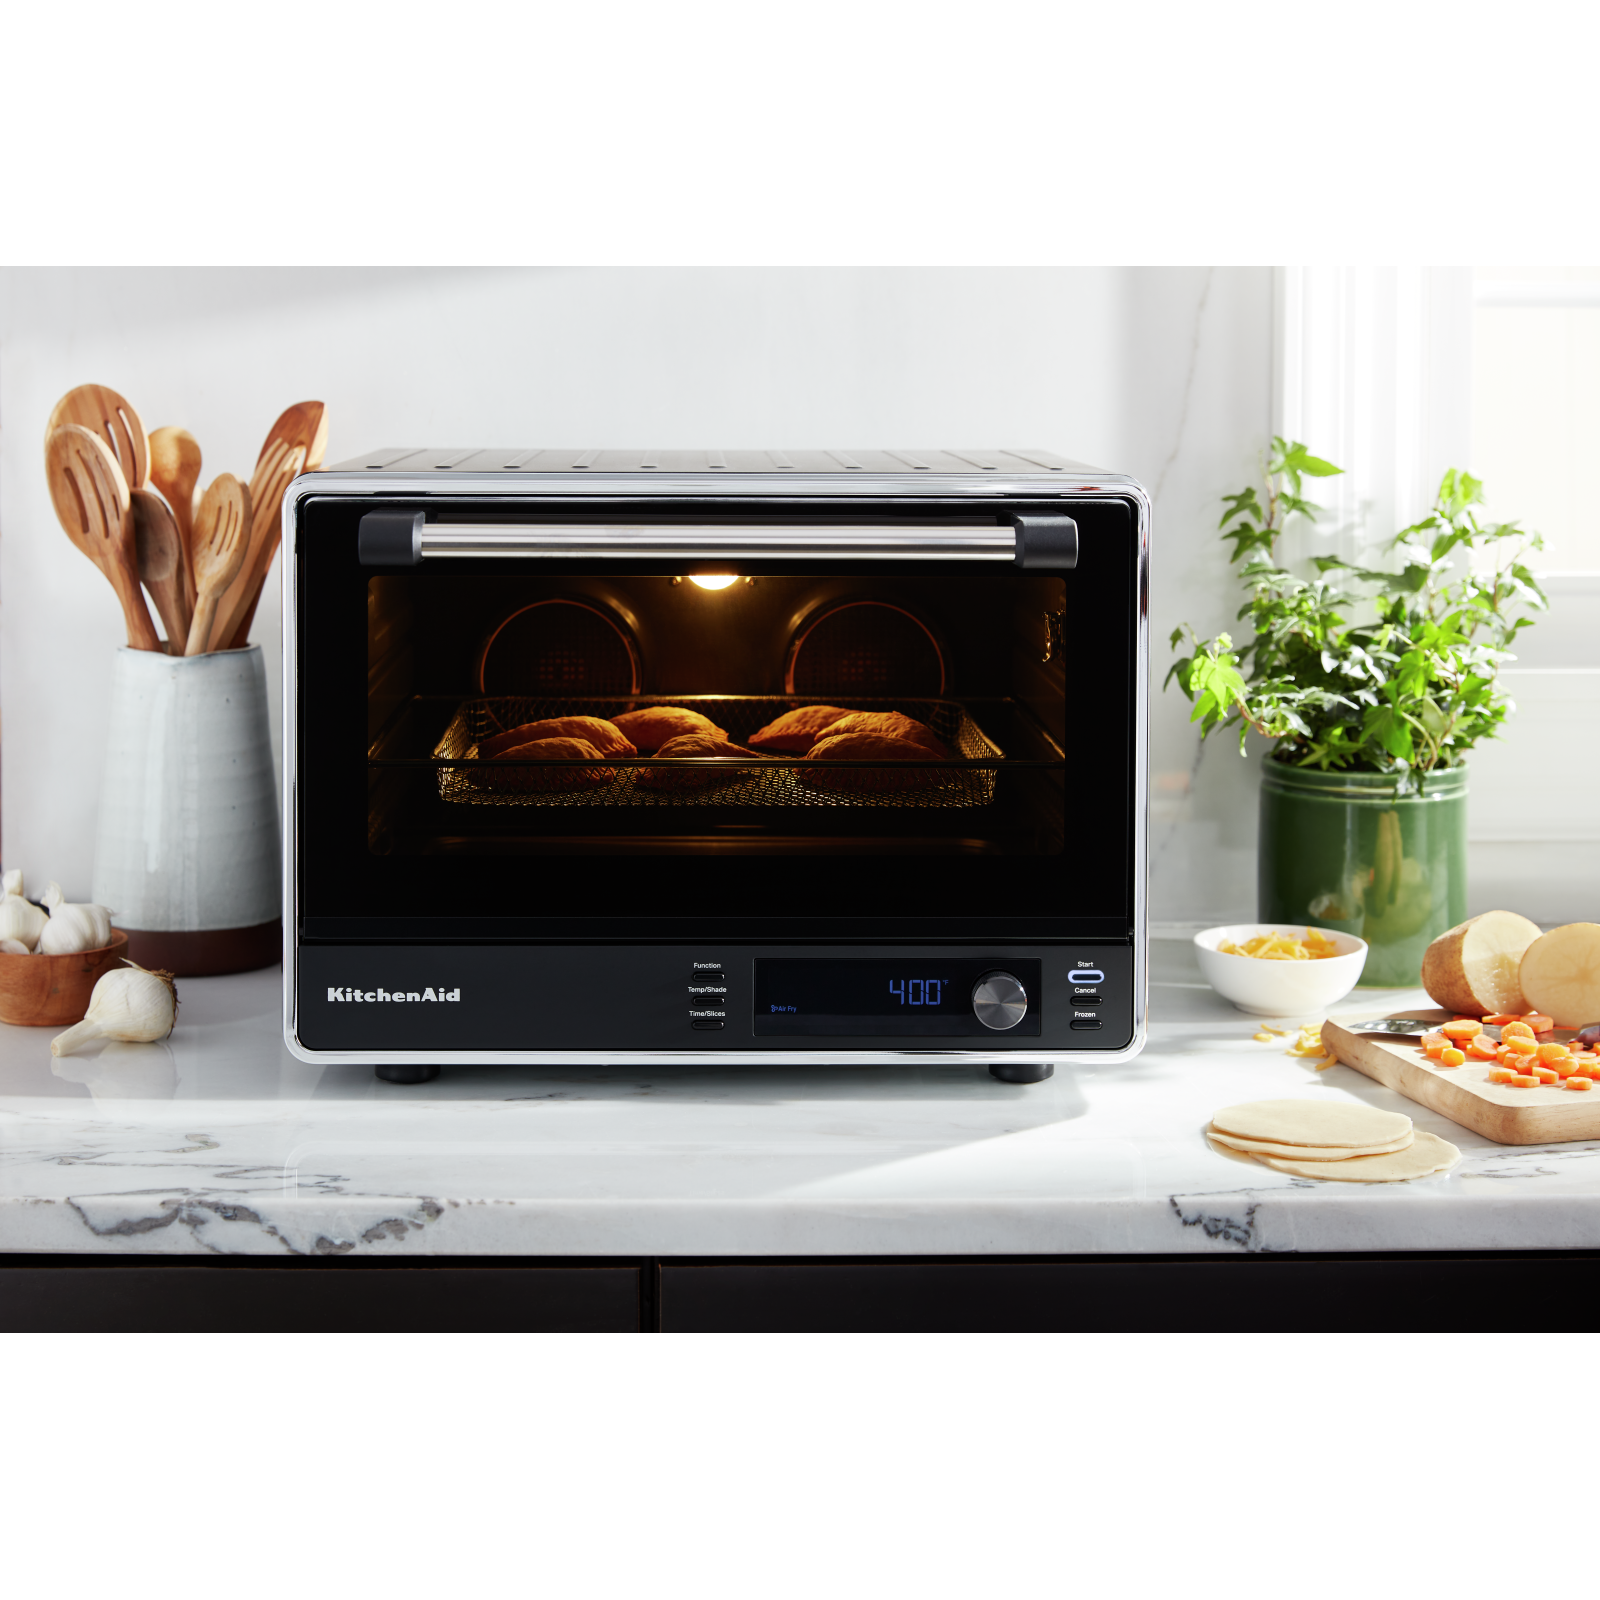 KitchenAid - Dual Convection Countertop Oven with Air Fry and Temperature Probe in Black - KCO224BM